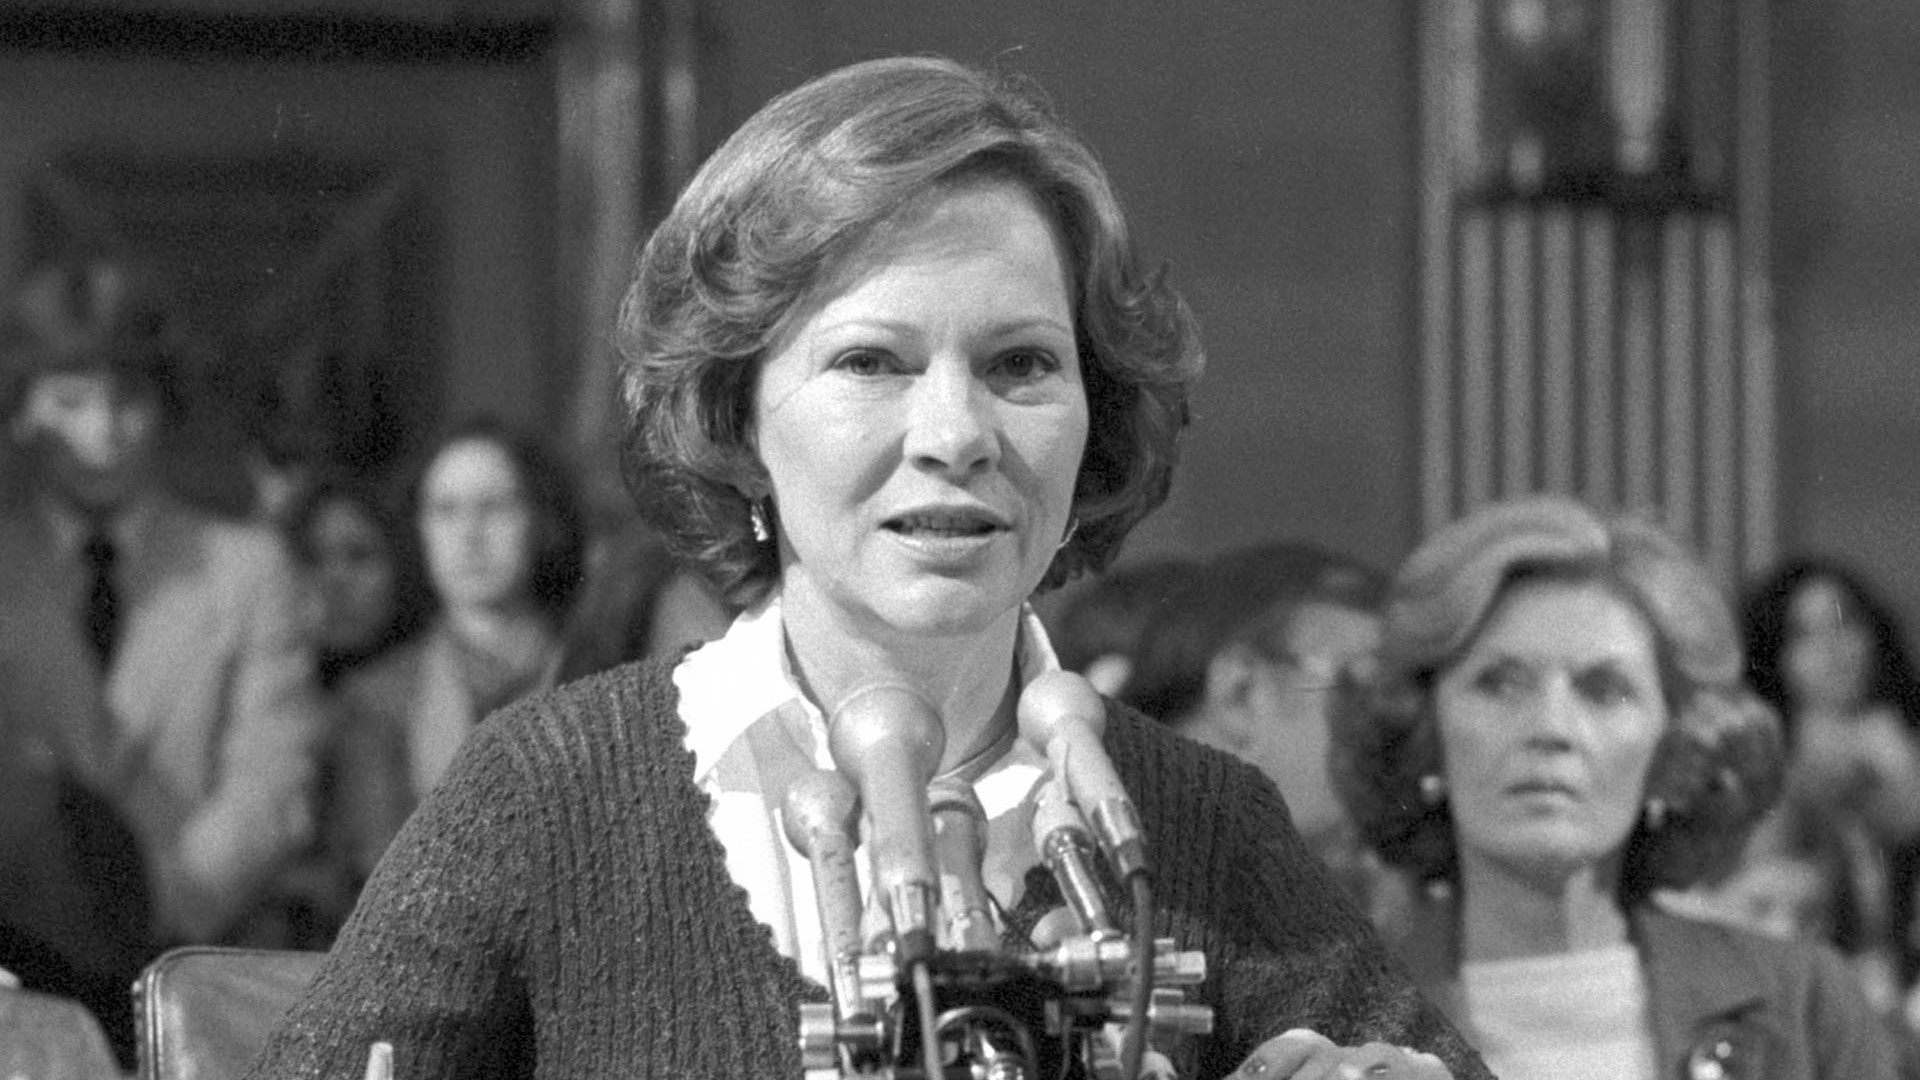 Rosalynn Carter, from Plains, Georgia is known as a trailblazer who made her presence known in the White House and impact can be felt around the world.